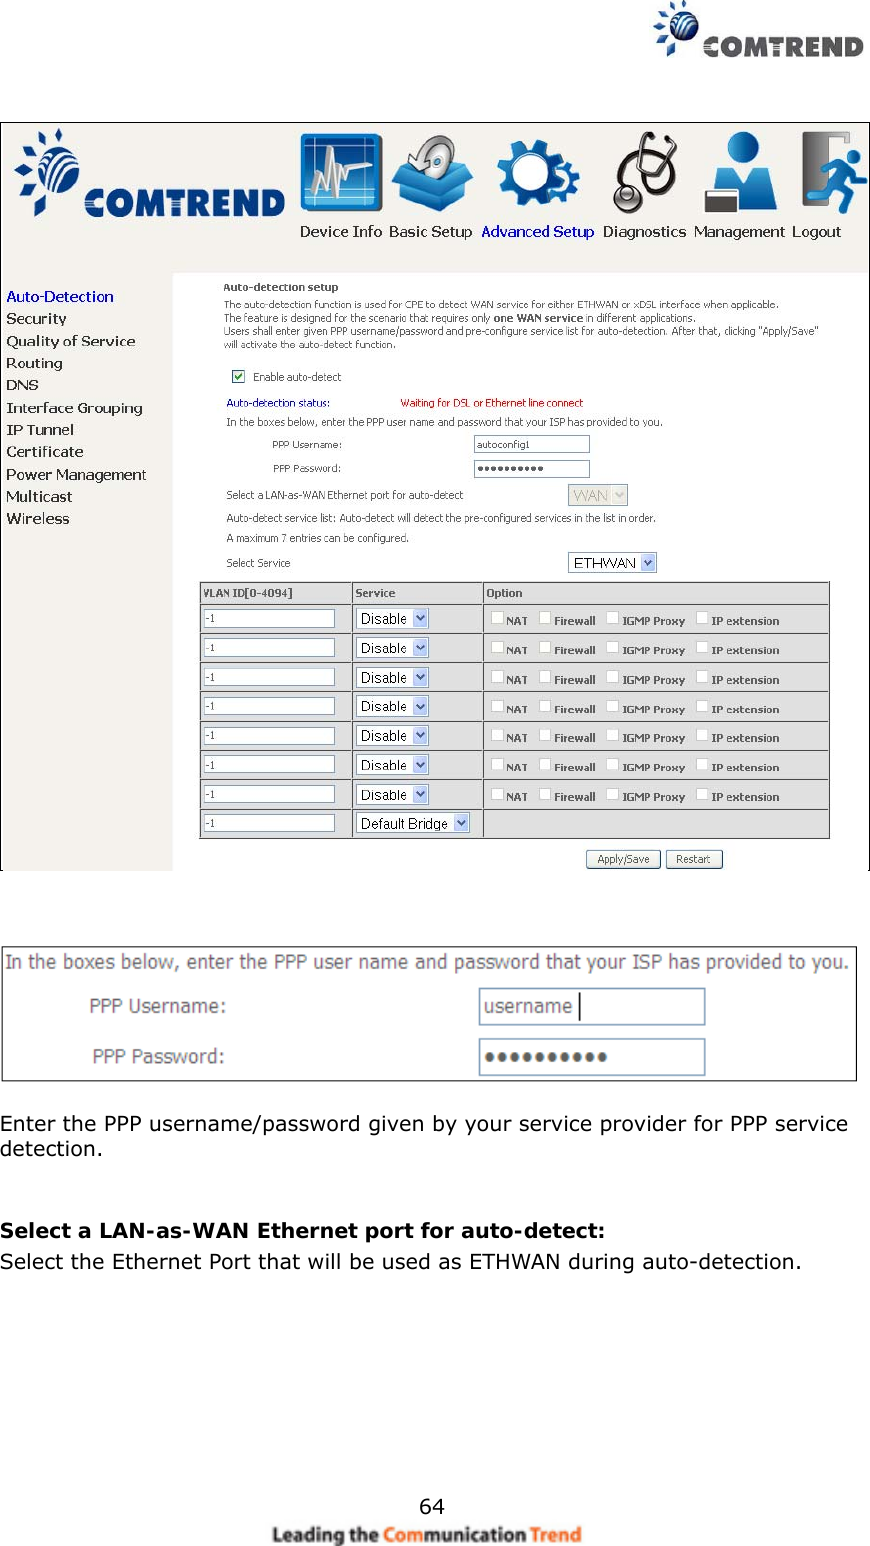    64         Enter the PPP username/password given by your service provider for PPP service detection.   Select a LAN-as-WAN Ethernet port for auto-detect: Select the Ethernet Port that will be used as ETHWAN during auto-detection.       